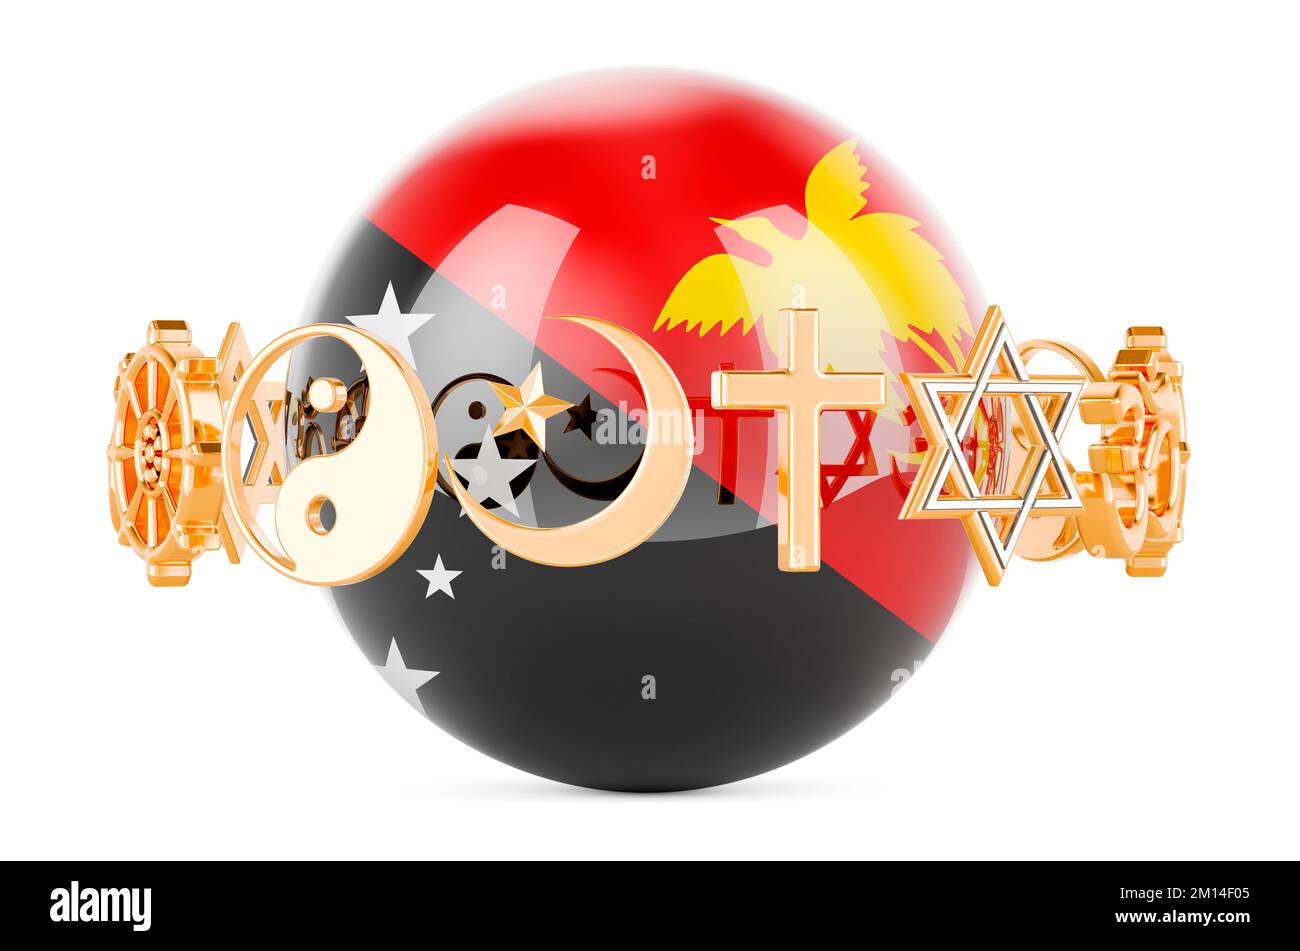 Papuan New Guinean flag painted on sphere with religions symbols around, 3D rendering isolated on white background Stock Photo